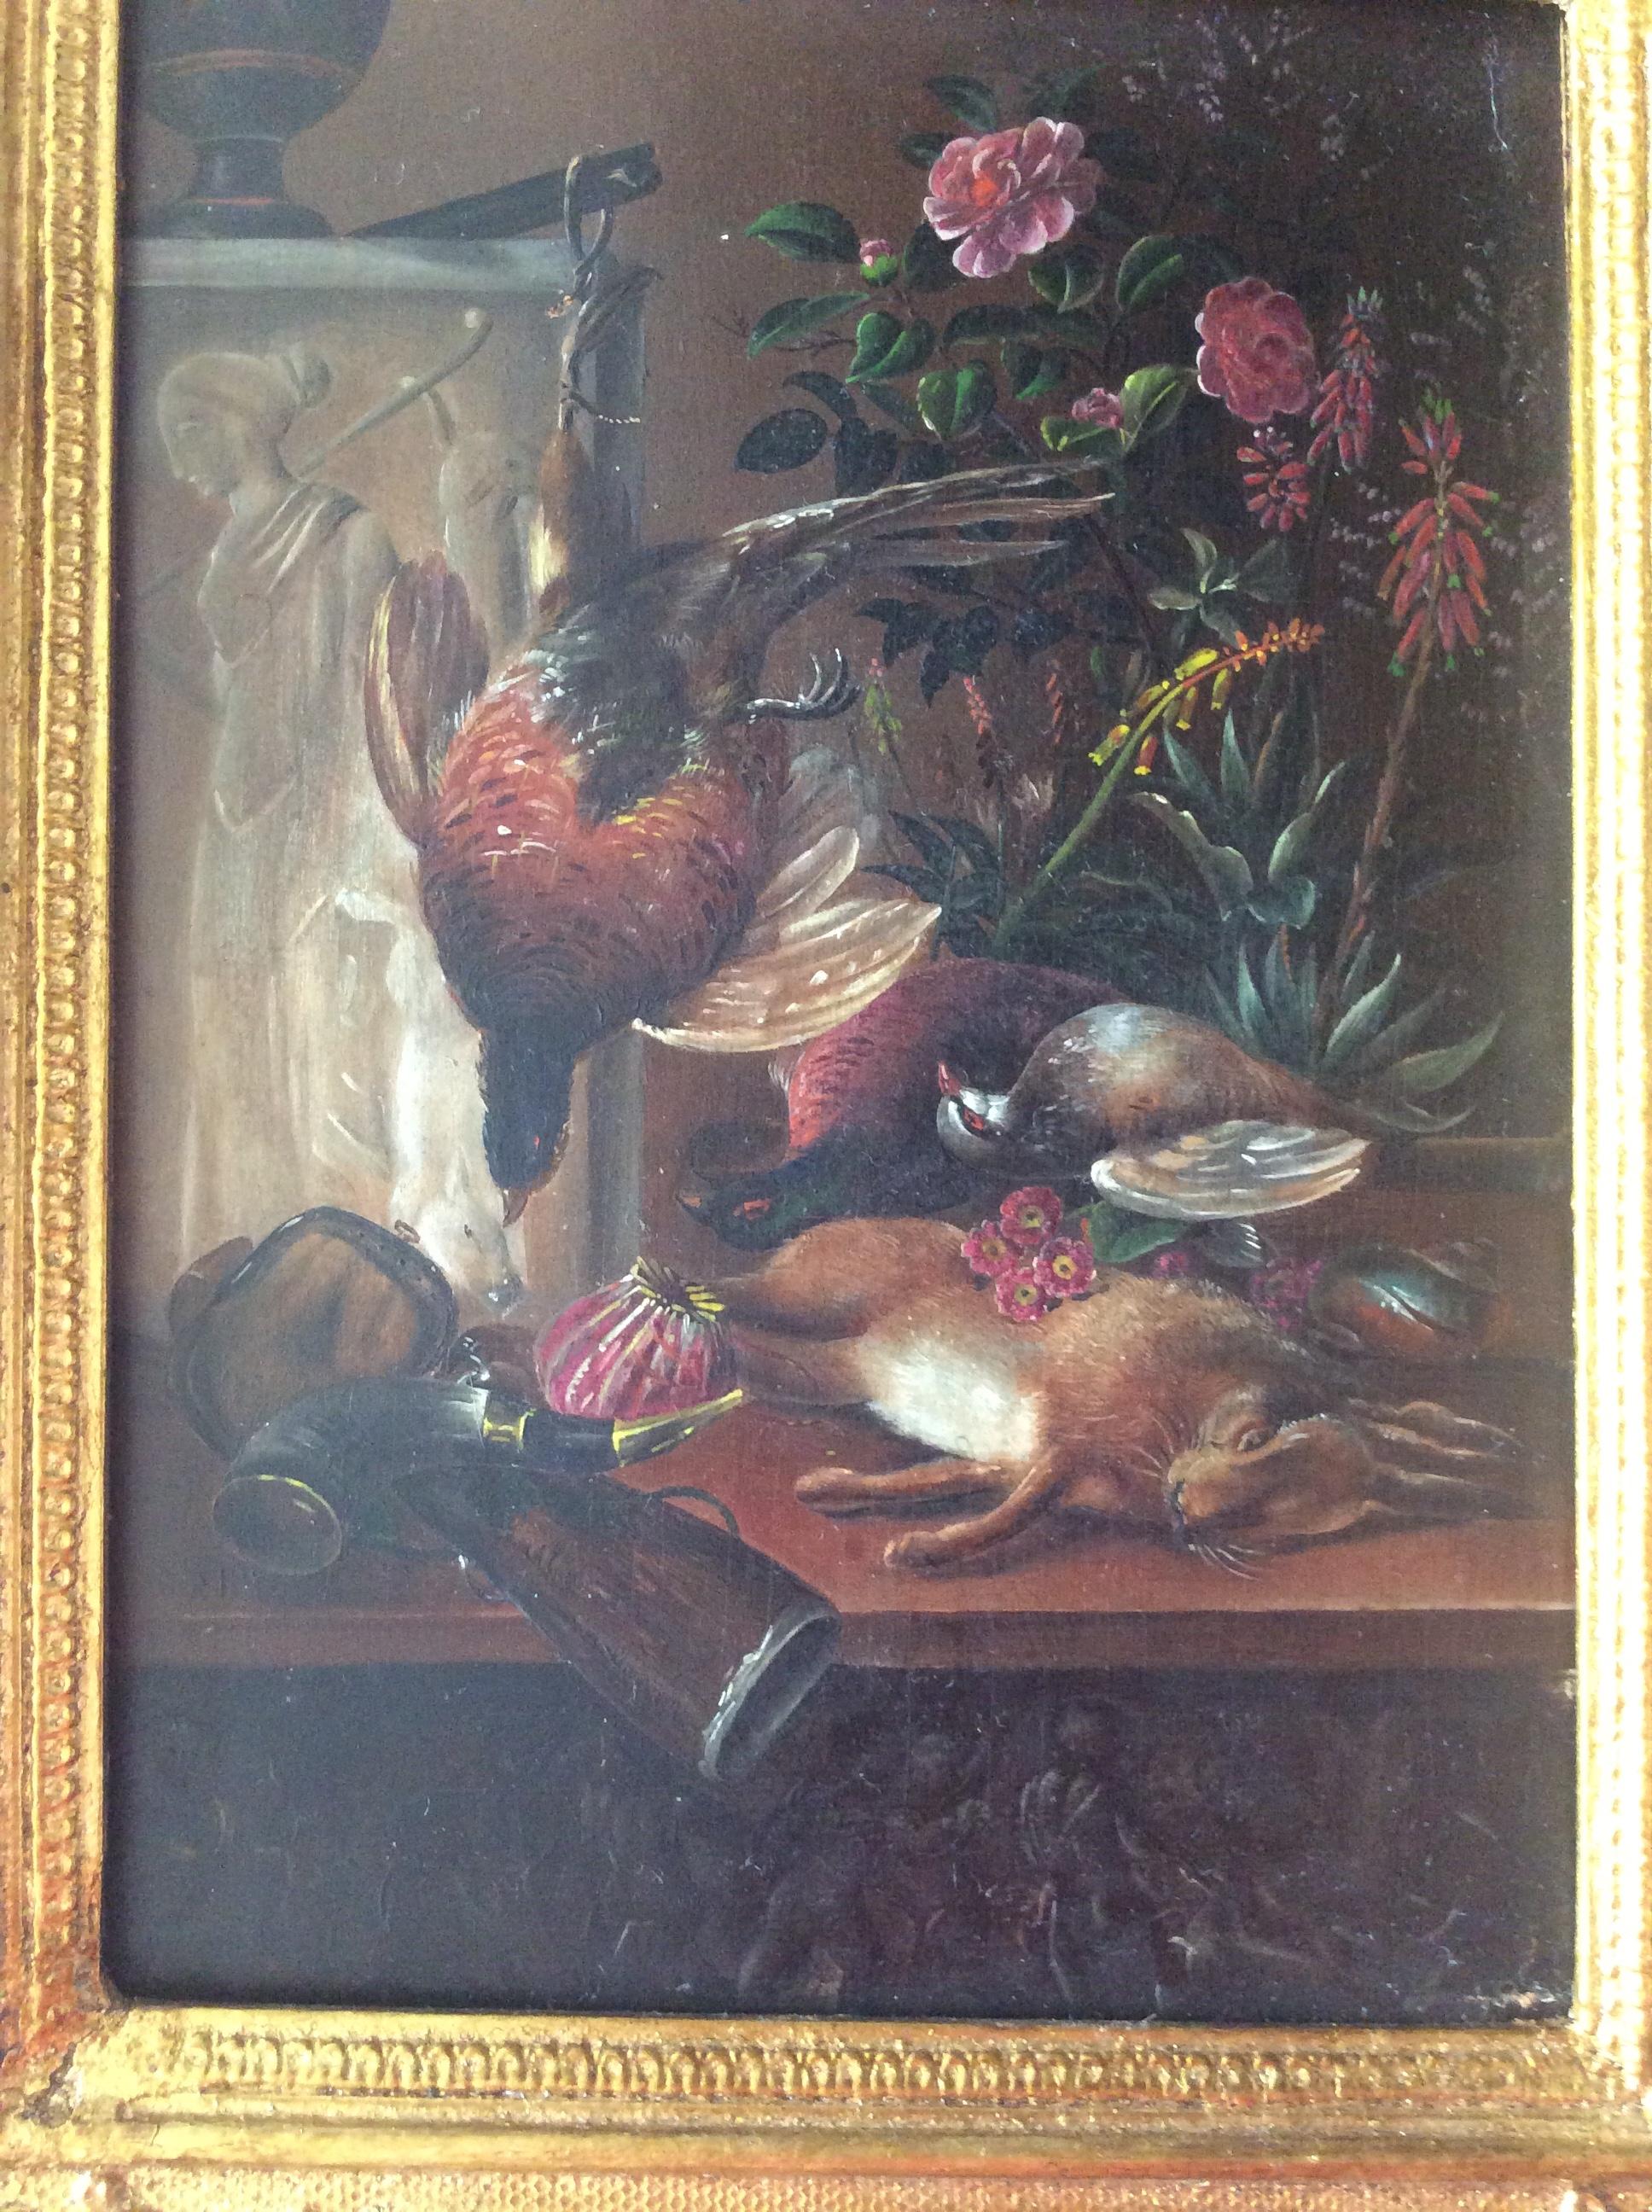 Painting nature morte, painted on wood Danish in still of
I. L. Jensen born 1800-1856. Flowers, birds and hare, Greek vase and relief: painting without frame W 14, H 19, D 1 cm- framed: W 21, H 27, D 3.